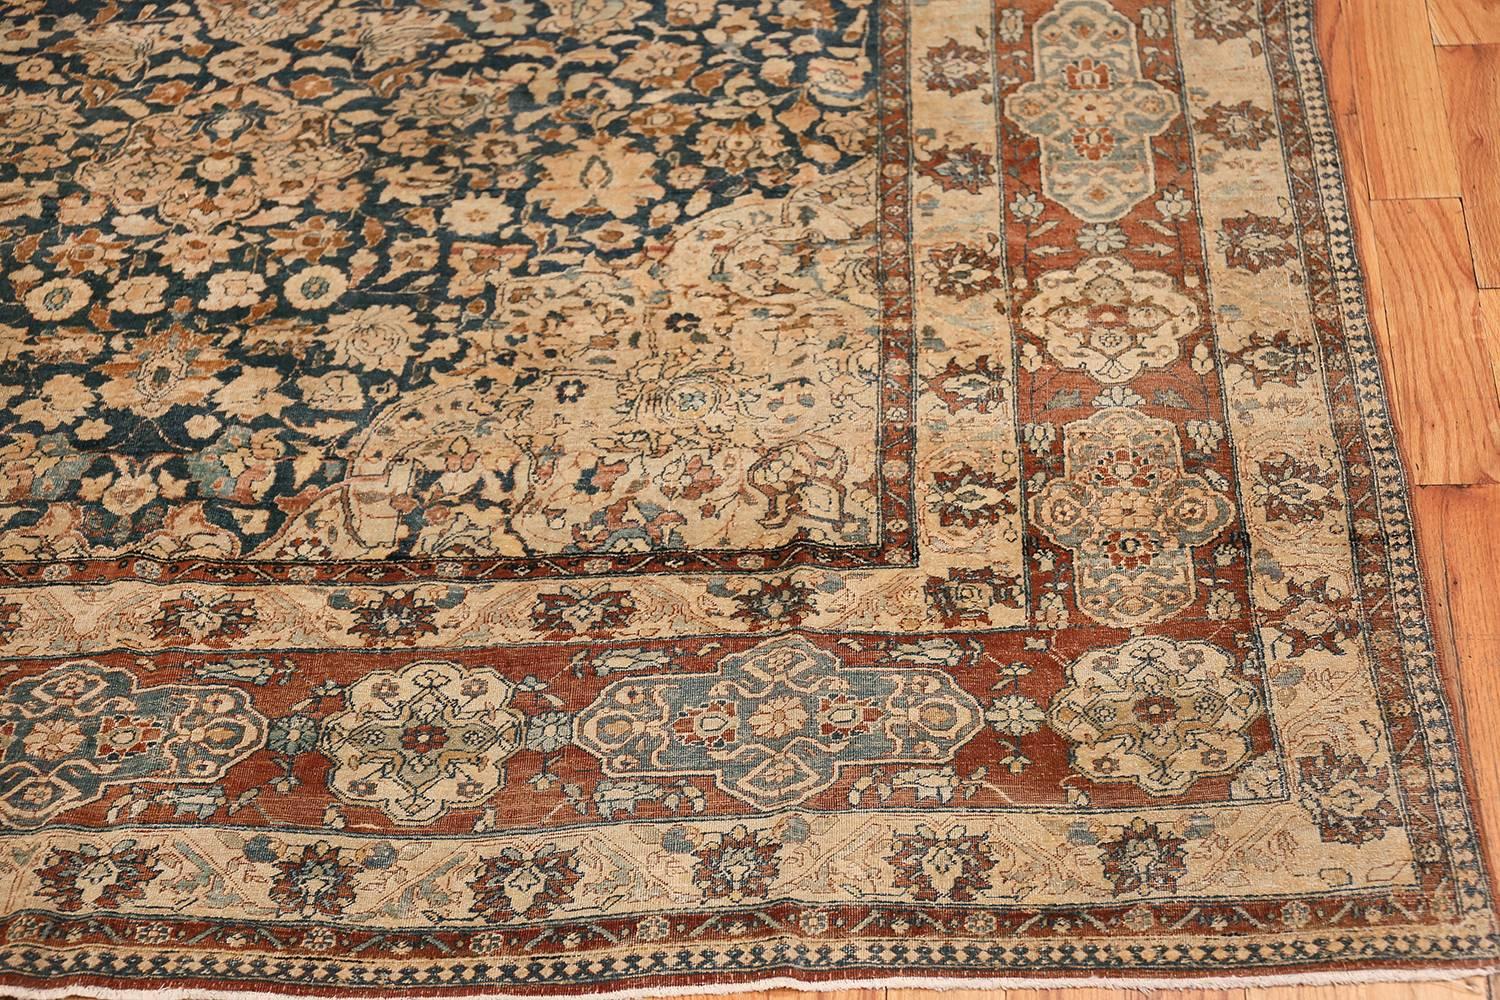 20th Century Blue Room Size Antique Persian Isfahan Rug. Size: 7 ft x 11 ft 8 in